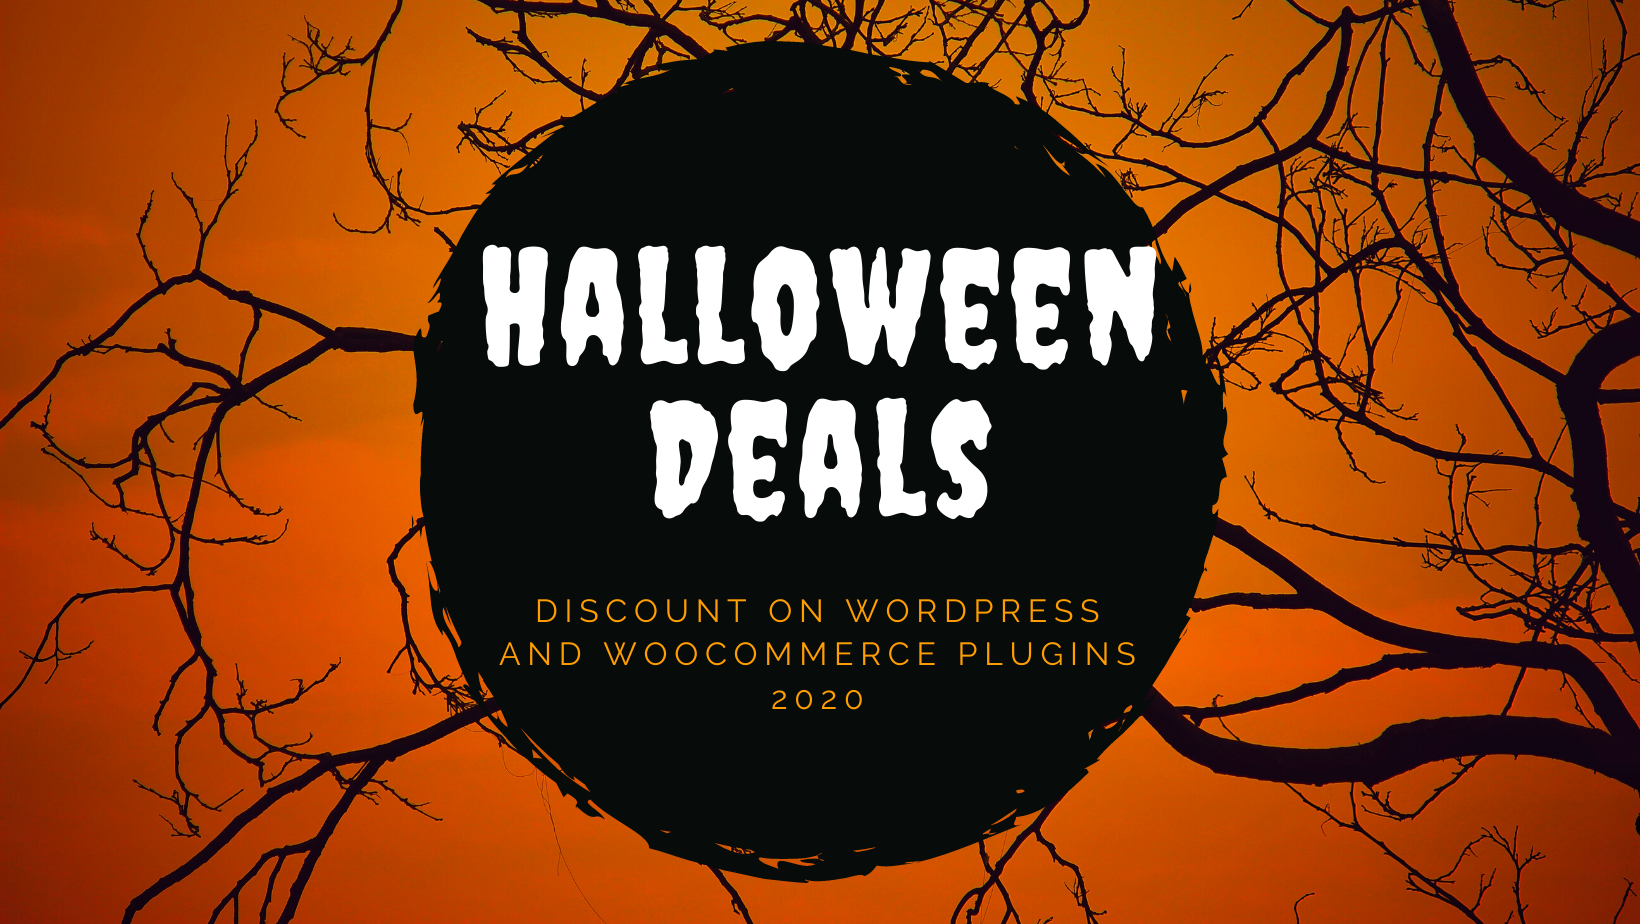 Best Halloween Deals and Discounts on WordPress and WooCommerce Plugins